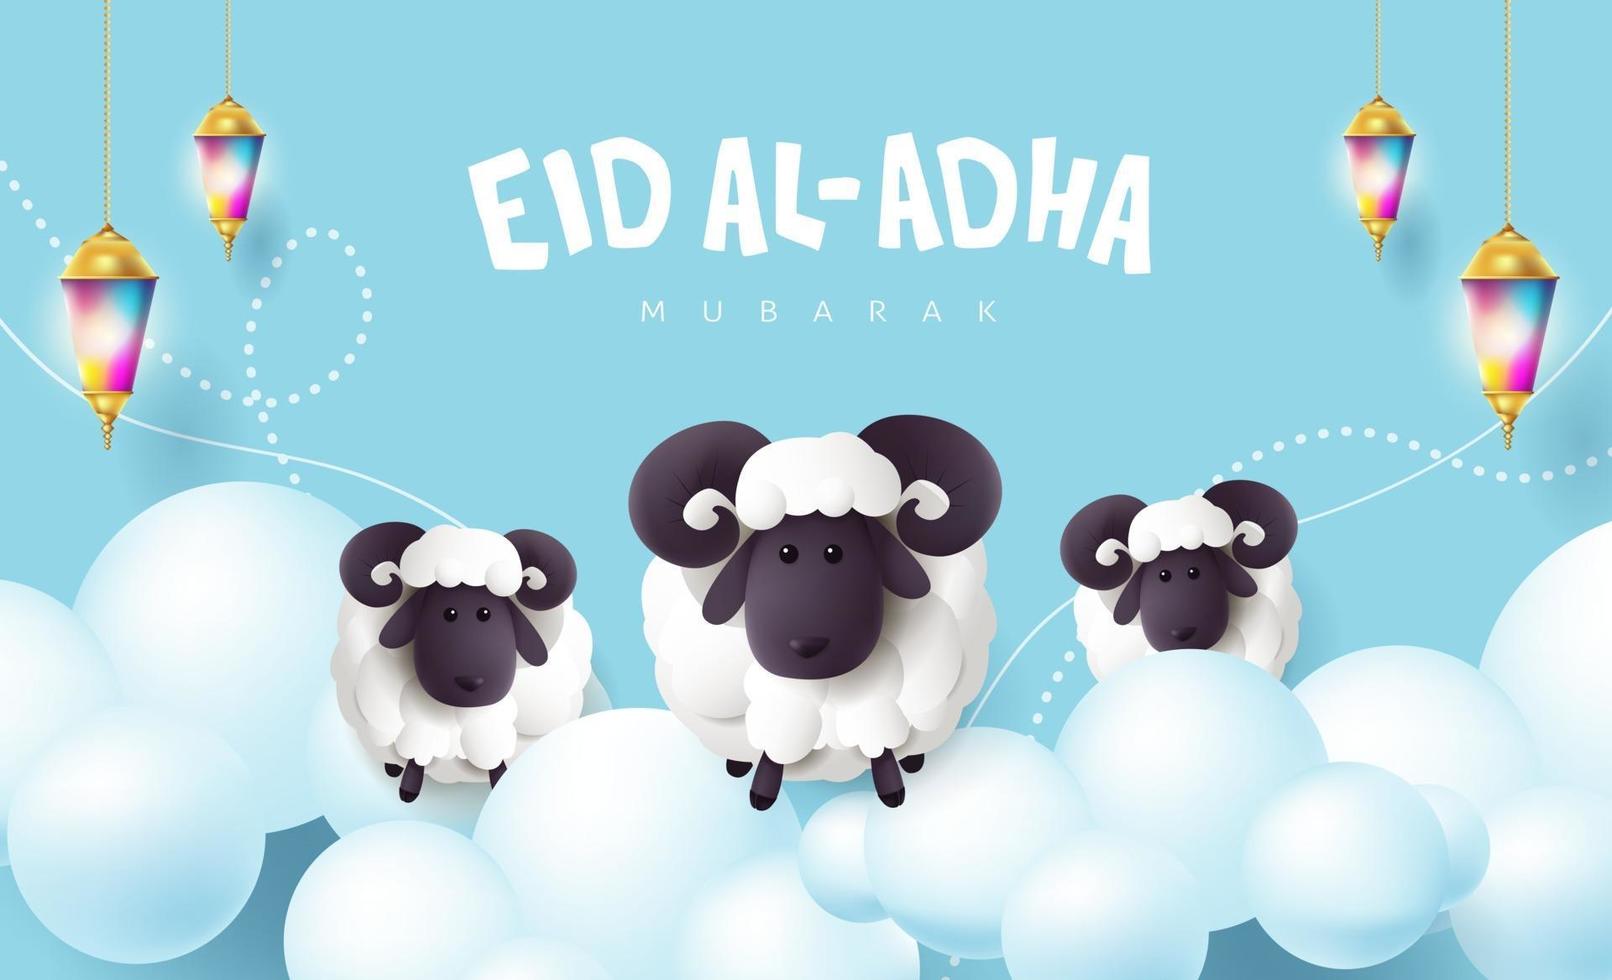 Eid Al Adha Mubarak the celebration of Muslim community festival calligraphy with White sheep and cloud on the sky vector